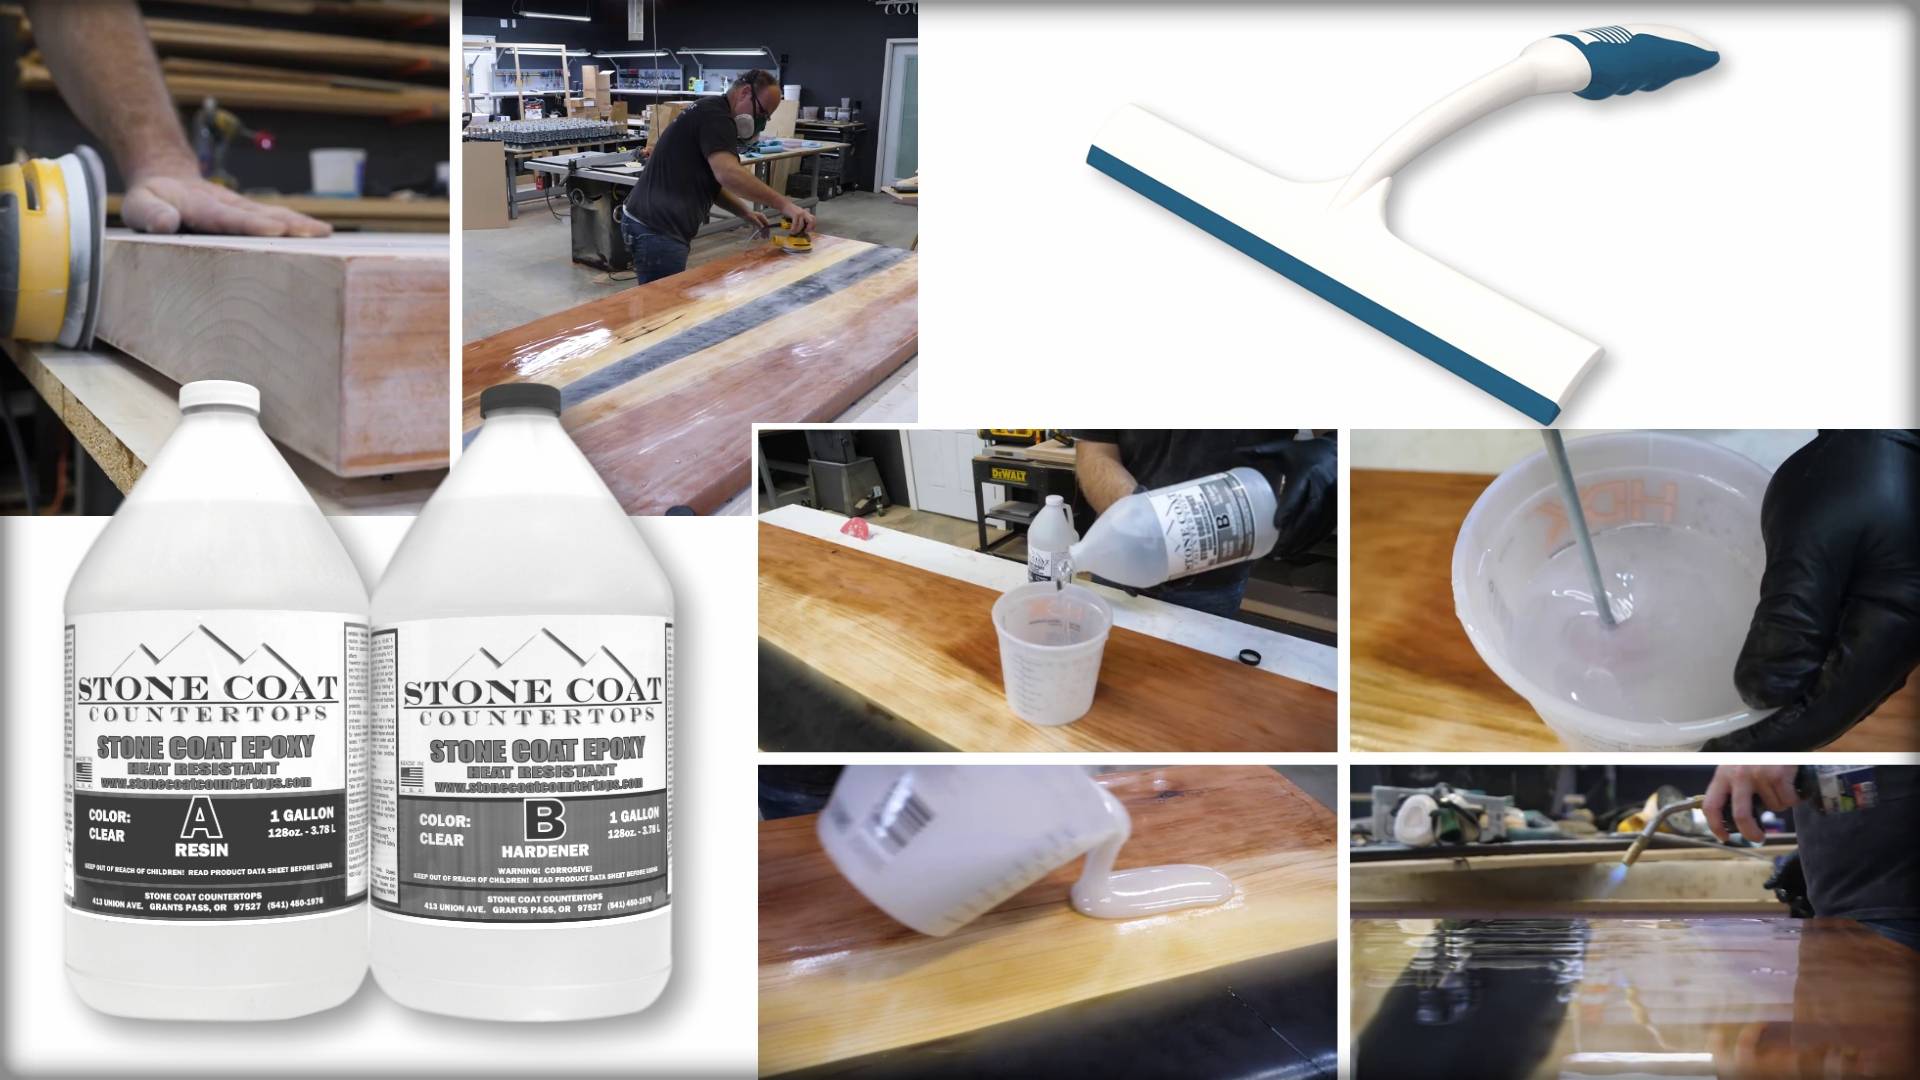 Polishing & Cleaning Kit for Epoxy Resin (Stone Coat Countertops) – Remove Scratches from Epoxy Projects After Sanding! Smooths Out Counters, Tables